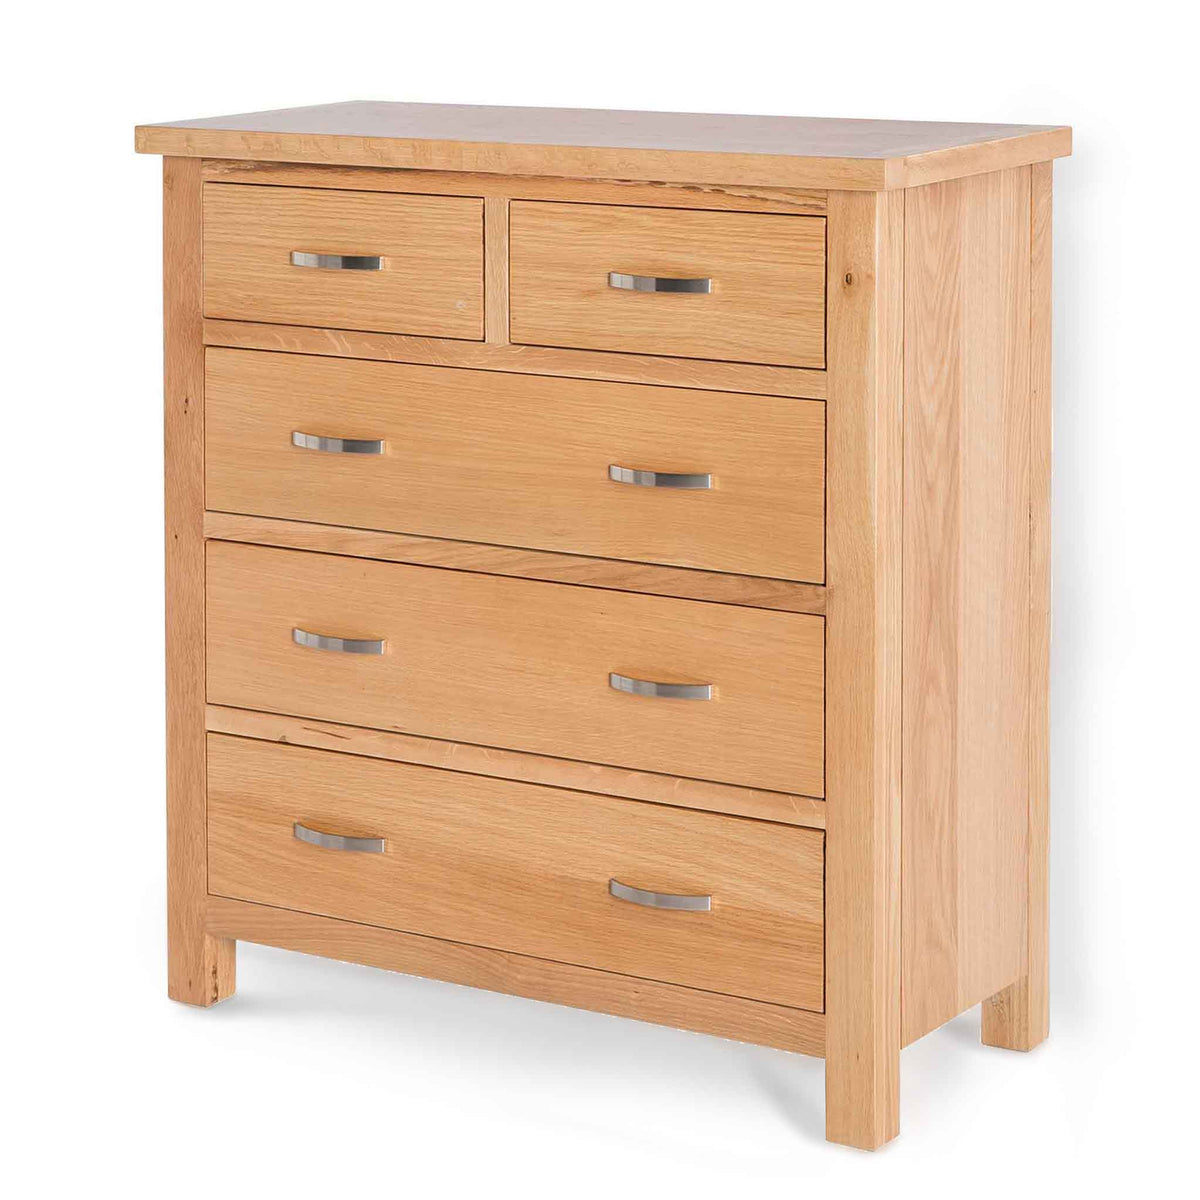 London Oak 2 over 3 Drawer Chest - Side view